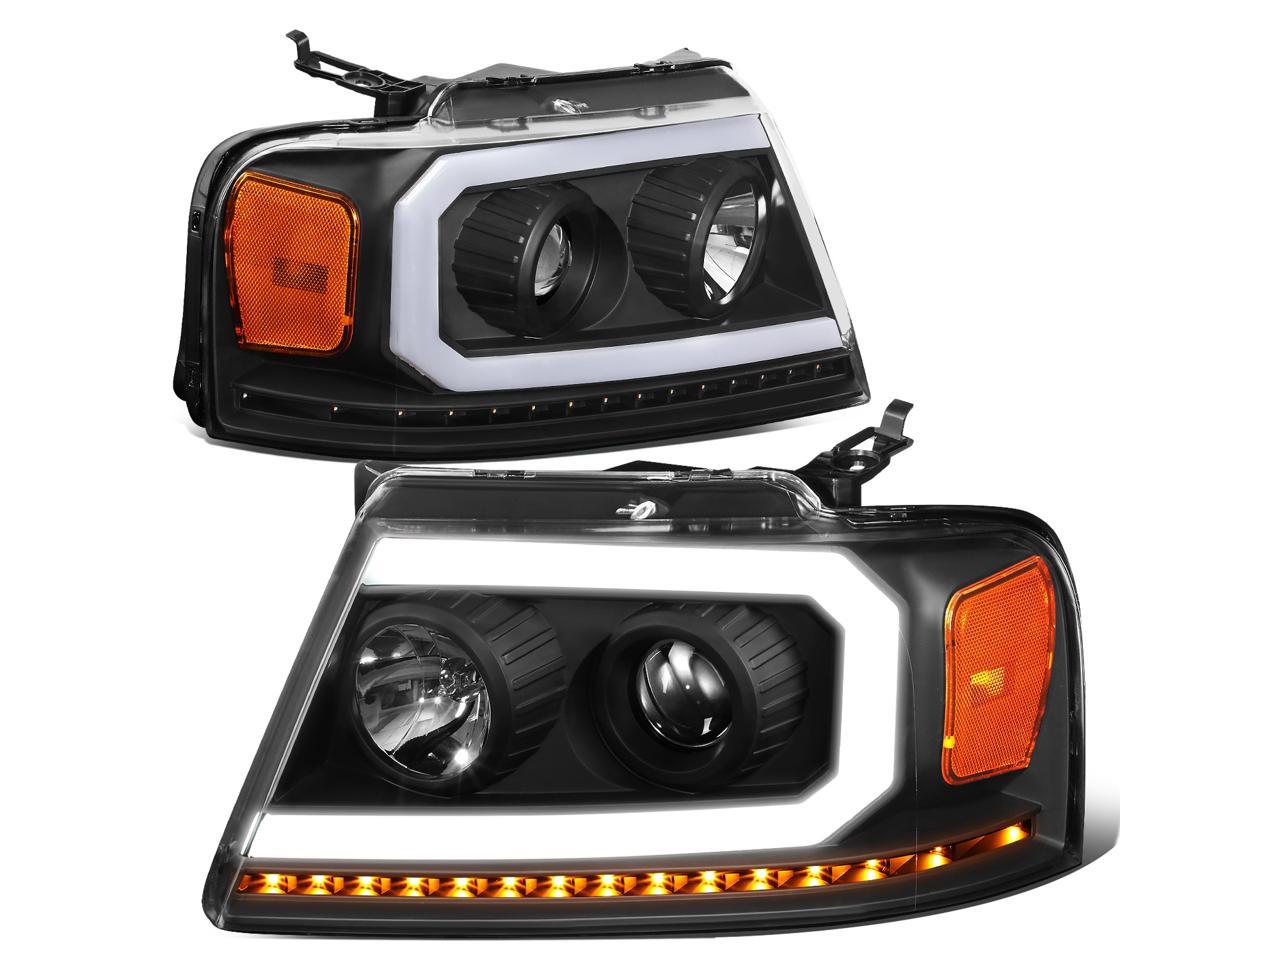 DNA Motoring HL-LED-F15004-CH-AM Chrome Amber Corner Headlights With LED Light Bar Replacement For 04-08 F150 Mark LT 